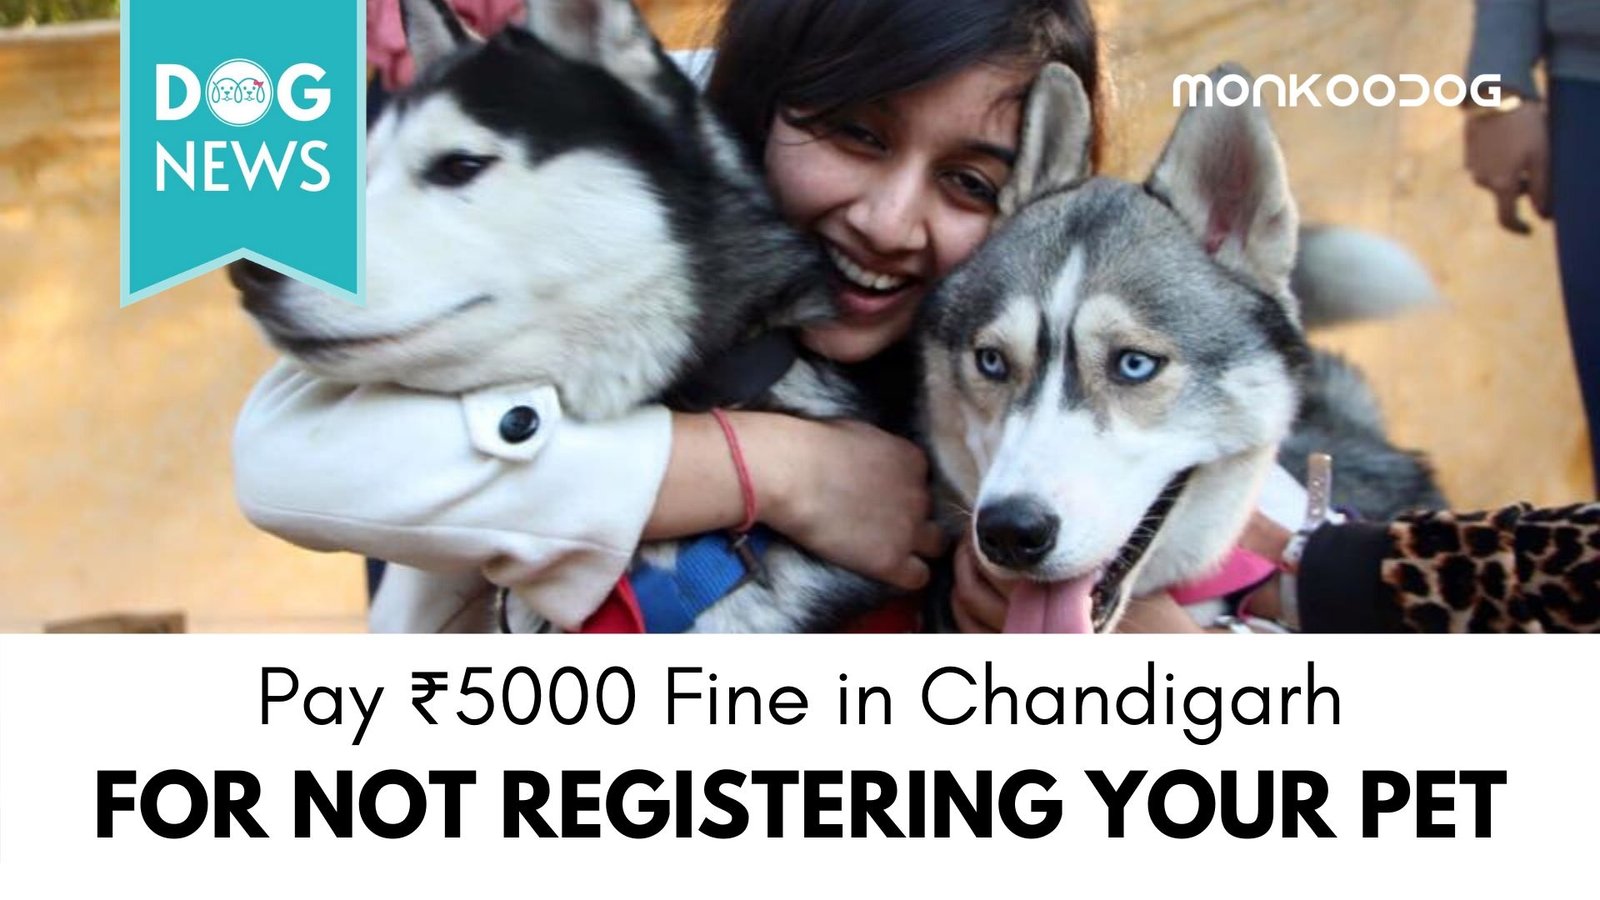 Chandigarh Residents Rush to Register Dogs Amidst the New Reformed Pet Law and Order in the City